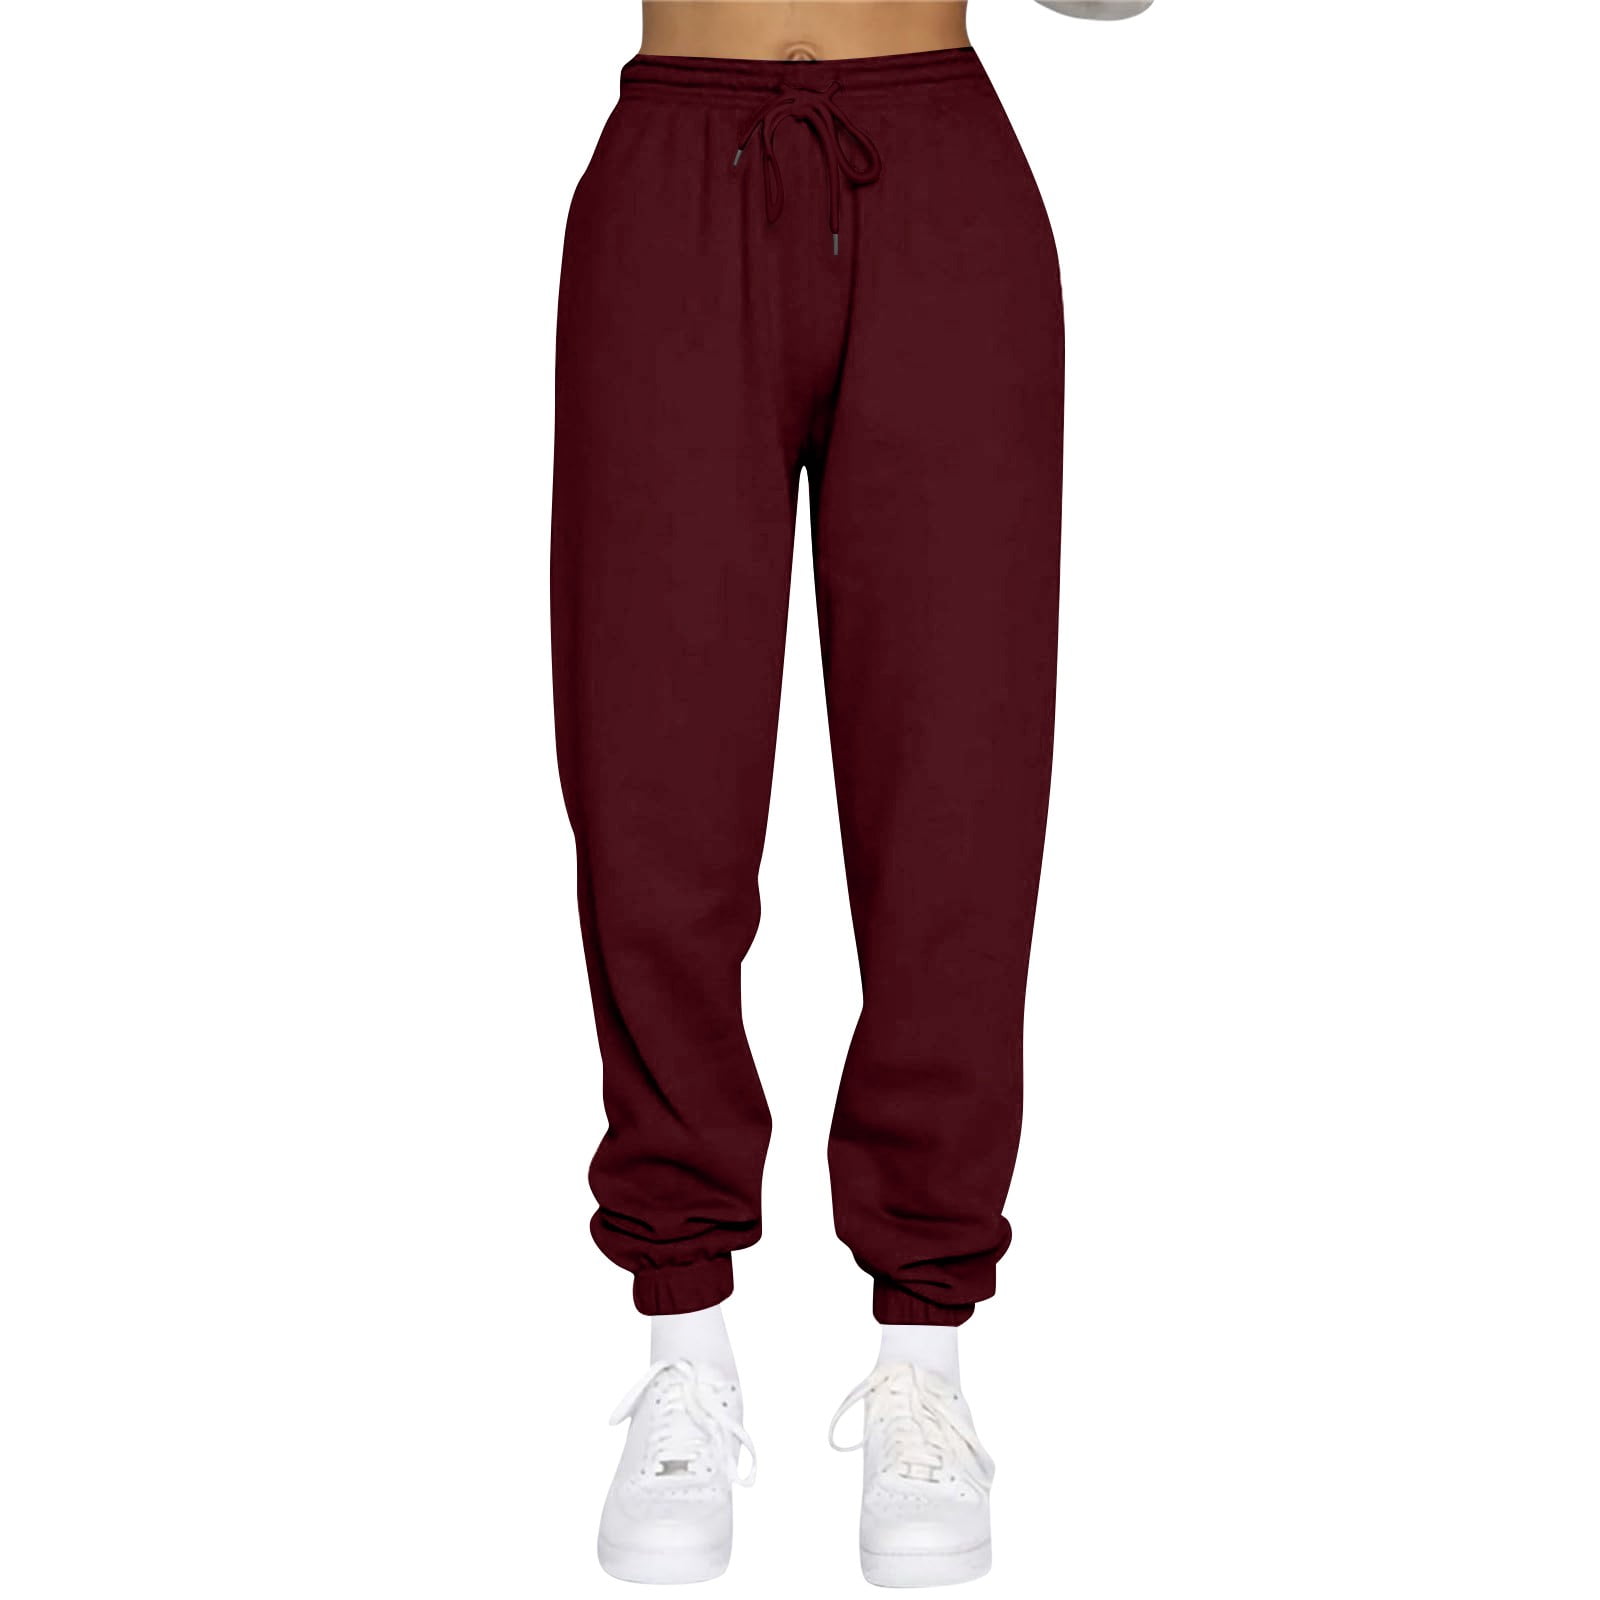 What Goes Good With Red Sweatpants? – solowomen